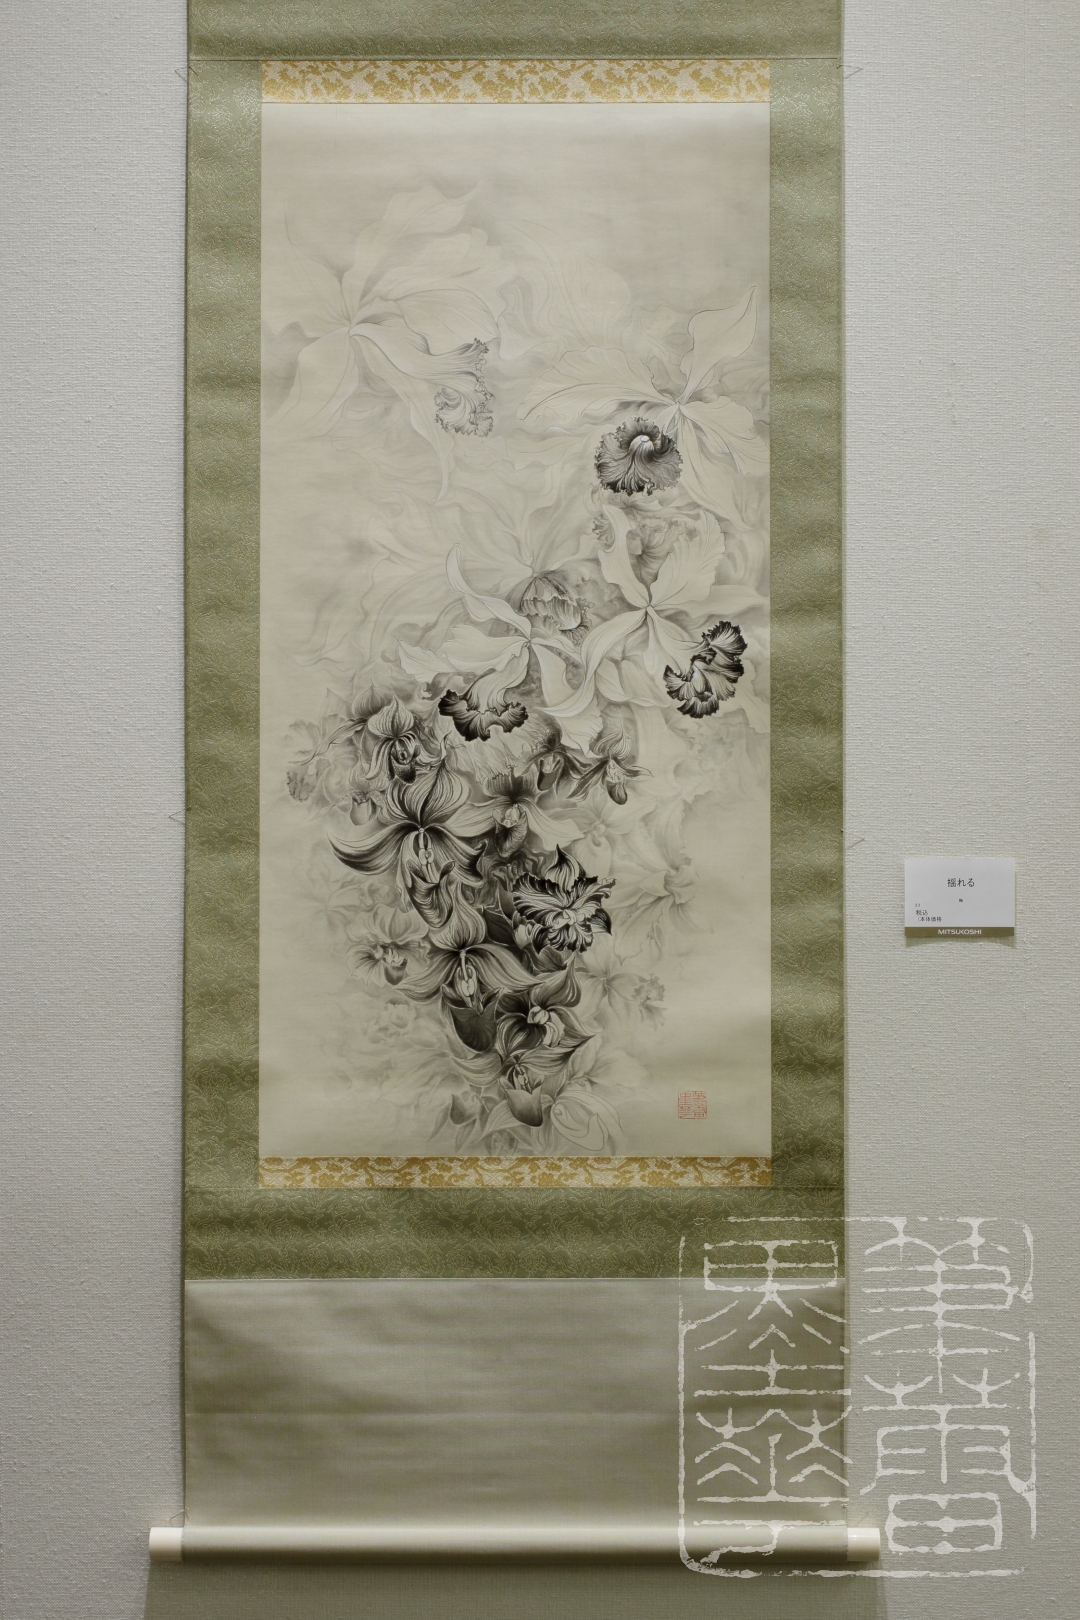 Hanging scroll of "Tremble"